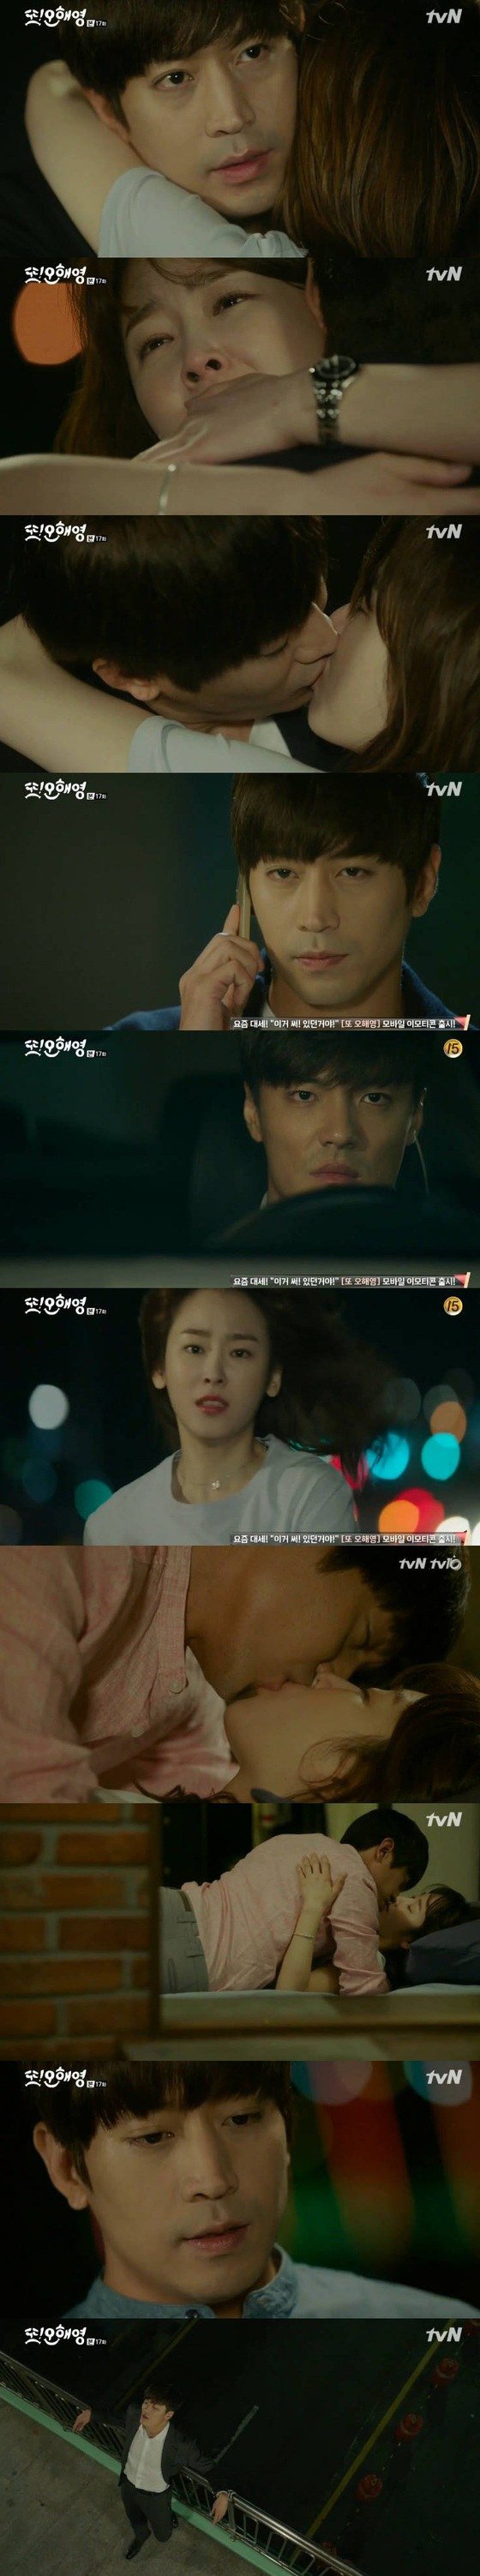 'Oh Hae-Young Again' Eric survives and kisses Seo Hyeon-jin